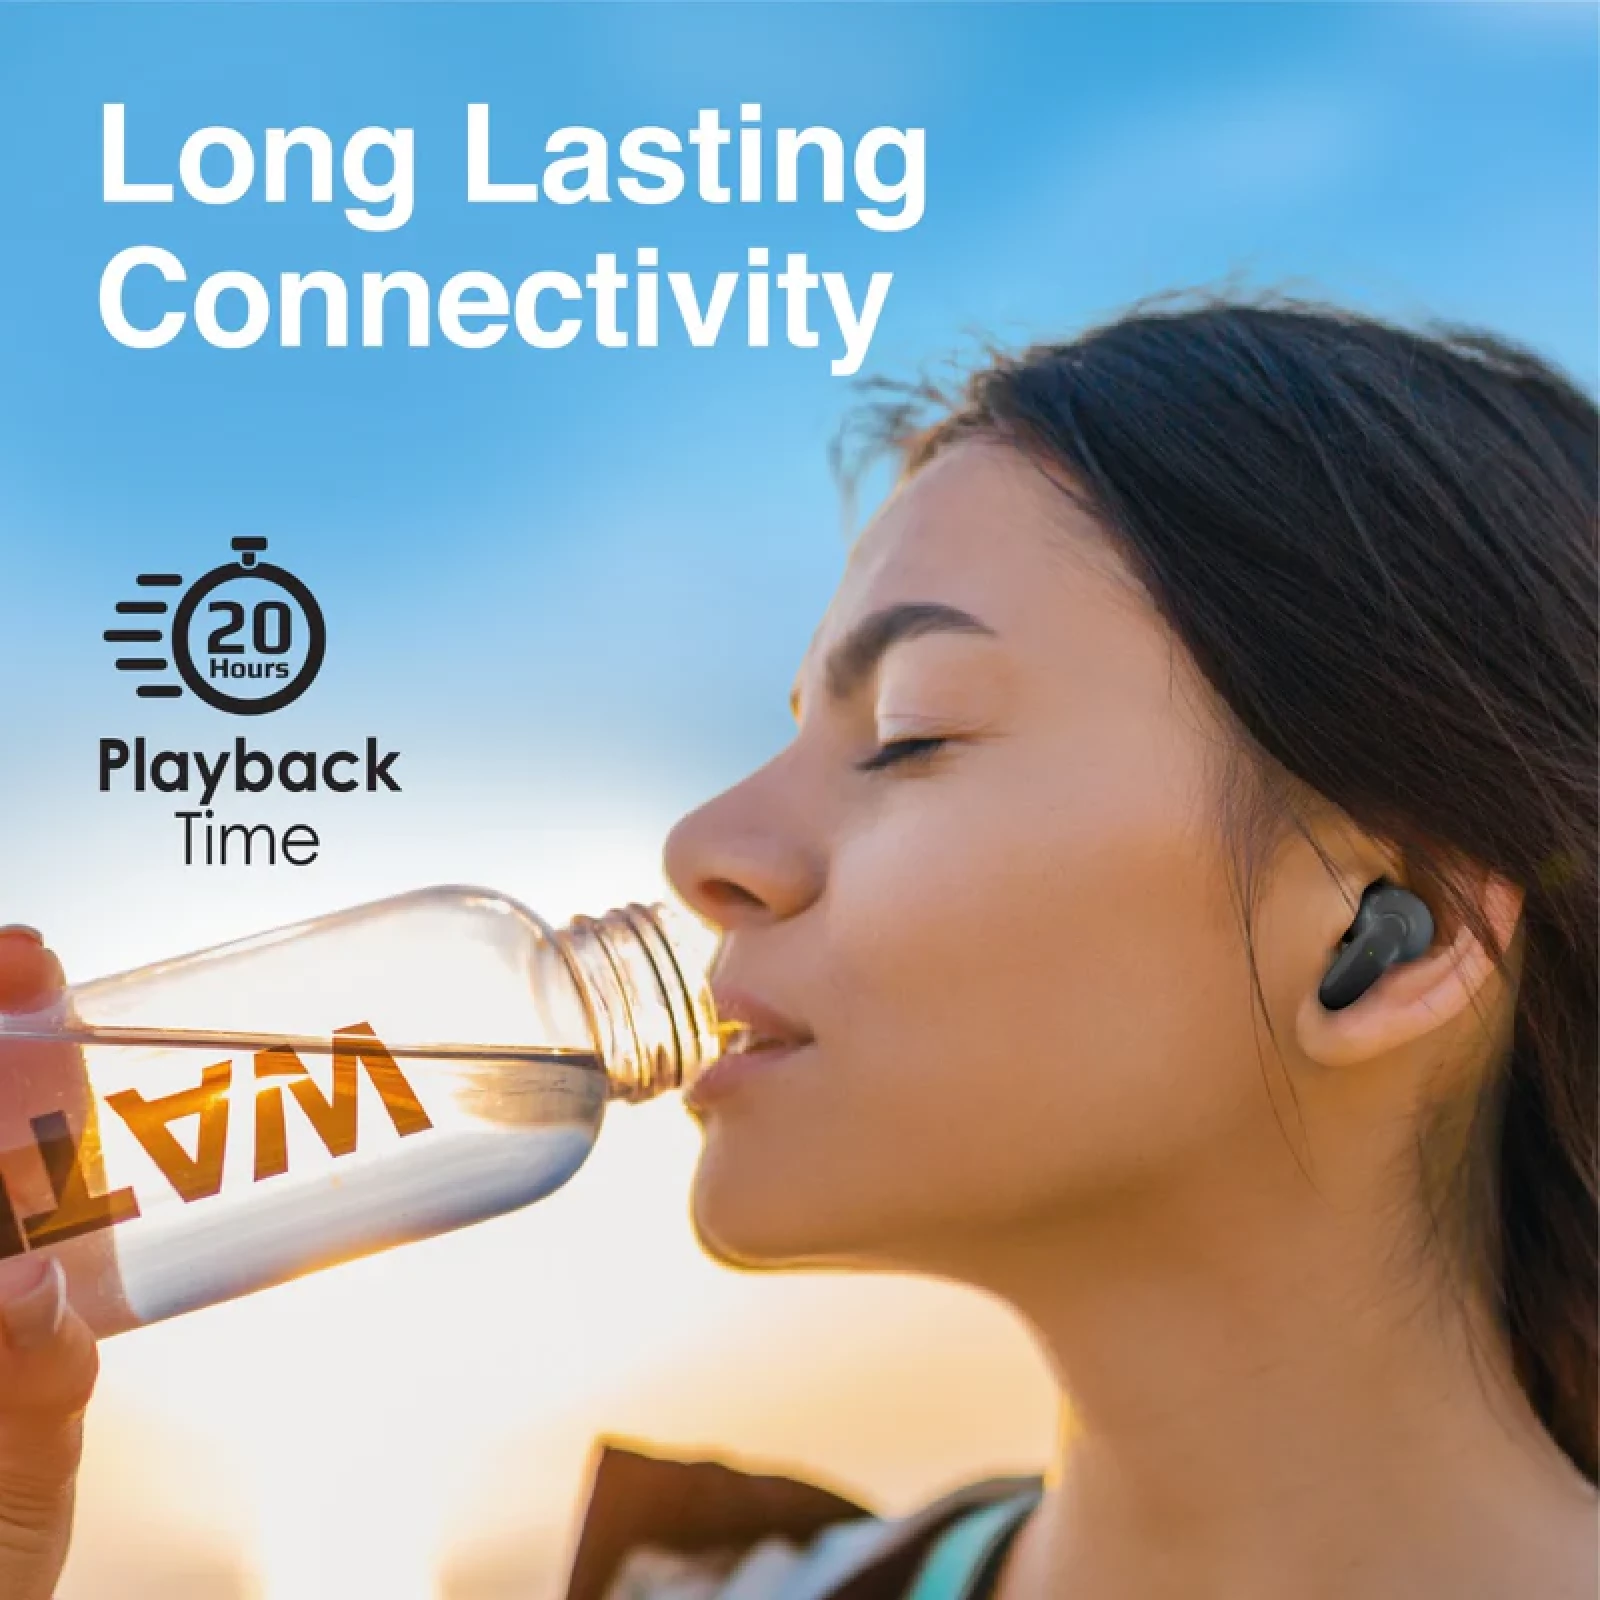 Безжични слушалки ProMate LUSH, Acoustic In-Ear TWS Bluetooth v5.1 Earphone • 19-Hour Playback • Ergonomic Fit Earbuds • Stable Connectivity, Черен